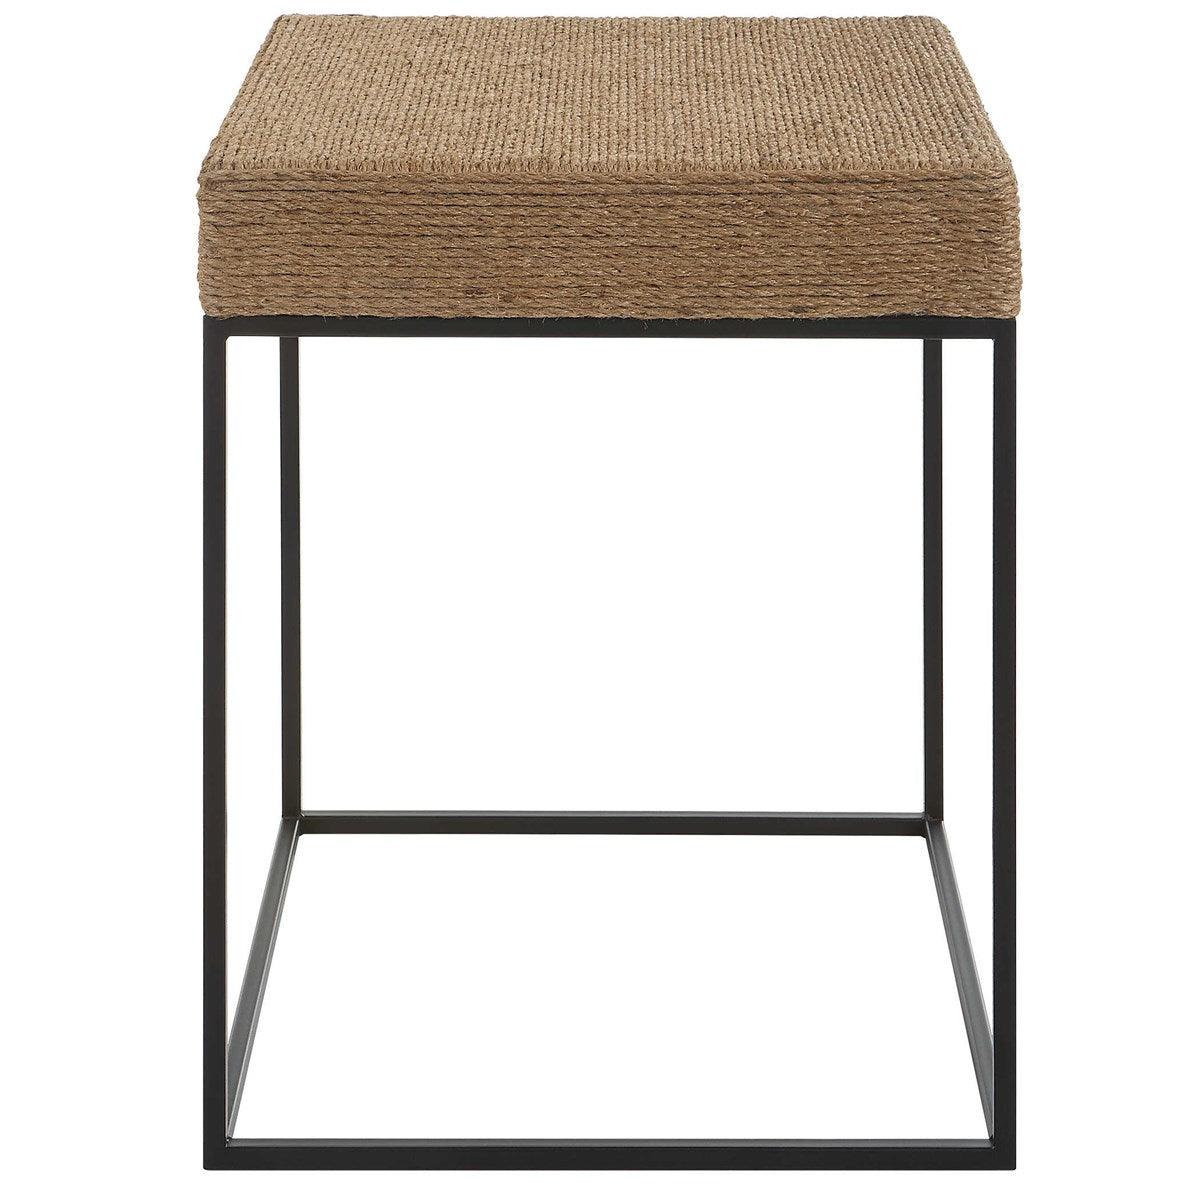 The Uttermost - Laramie Accent Table - 22884 | Montreal Lighting & Hardware